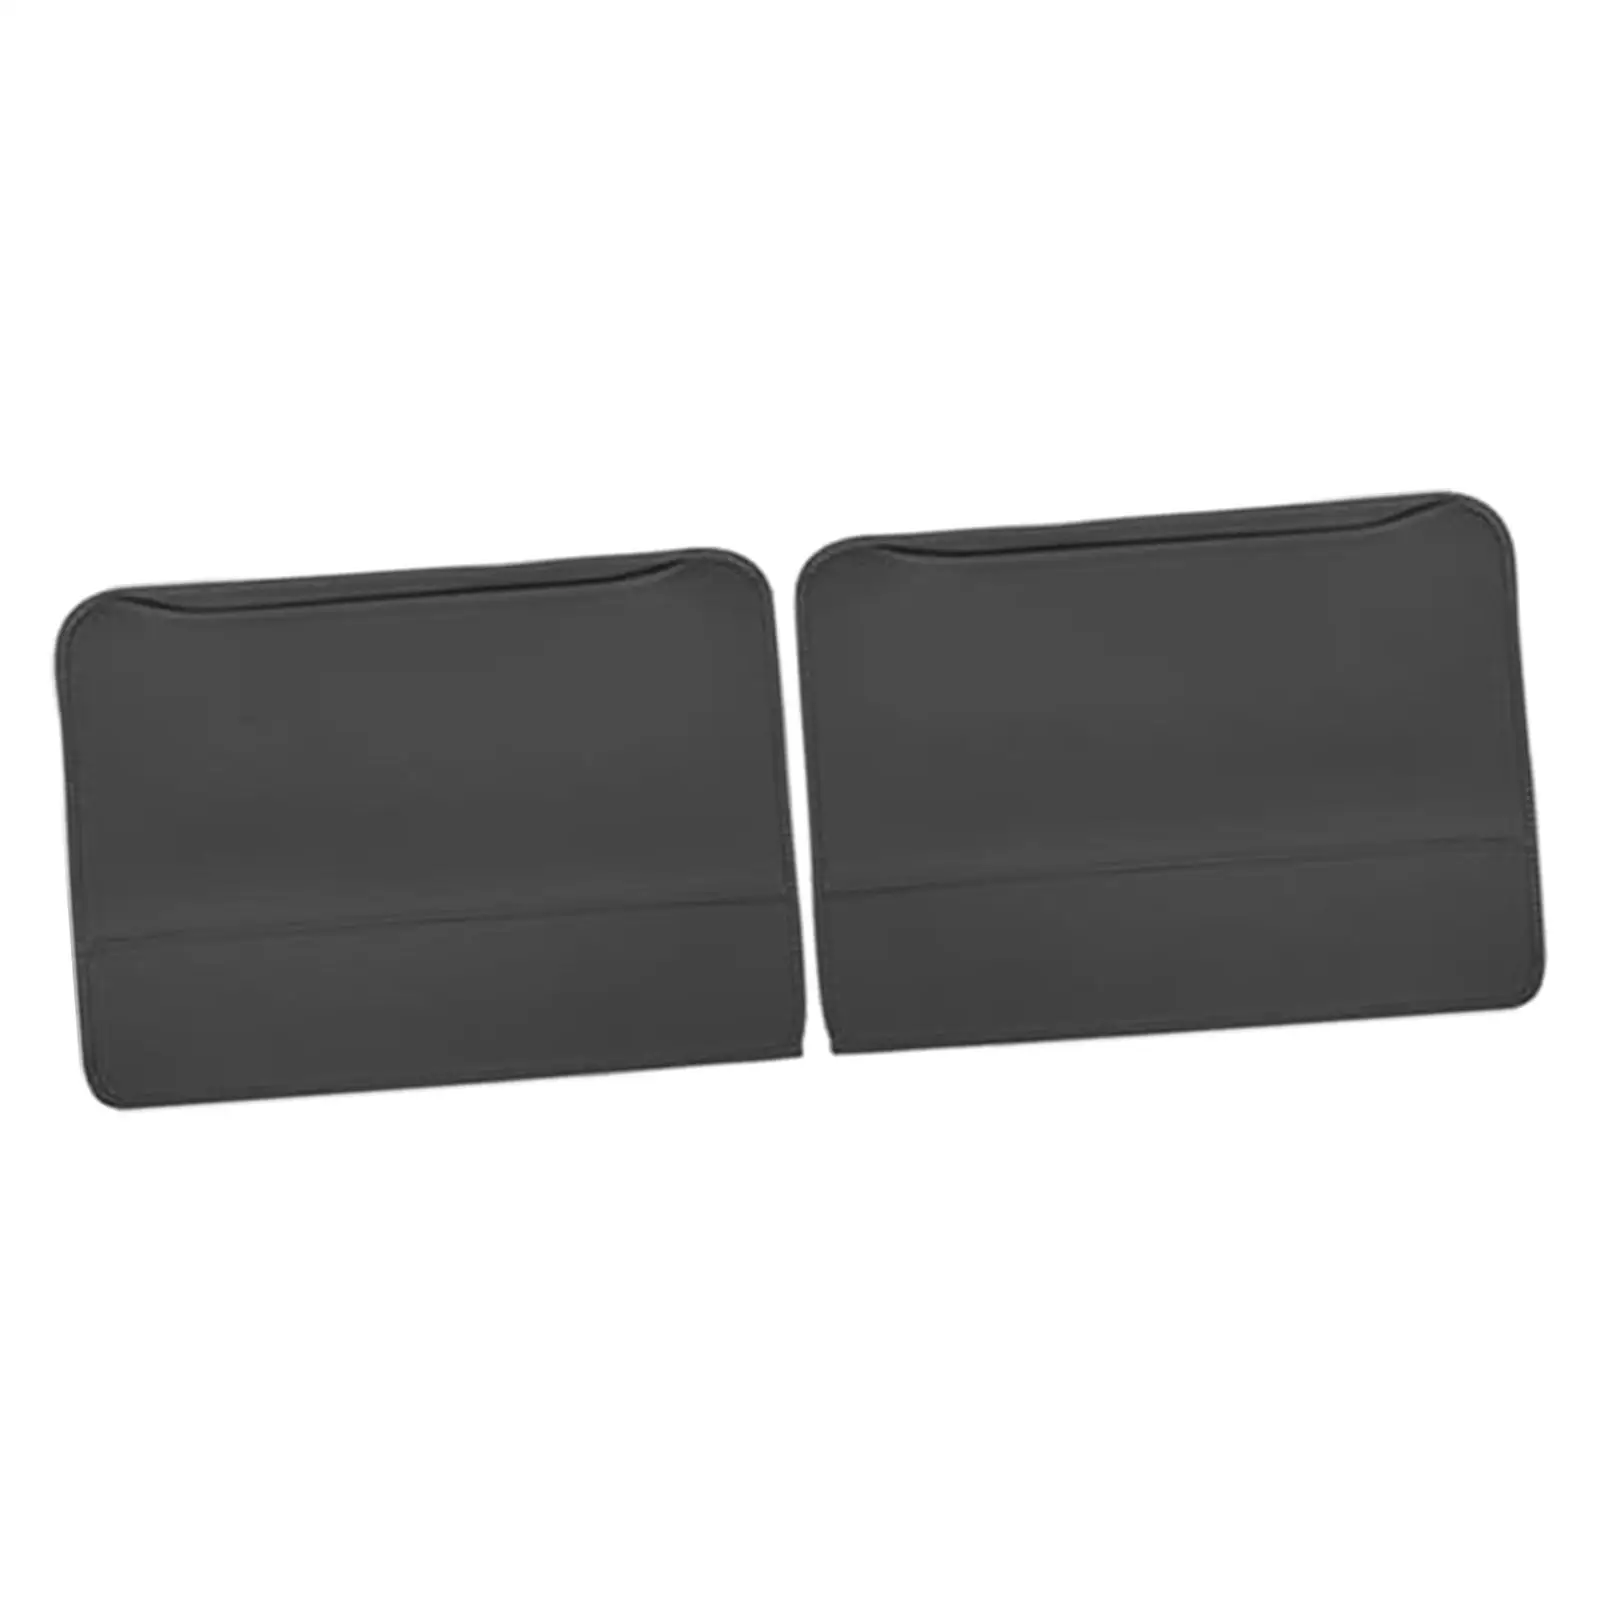 2x Seat Back Kick Mats Backseat Protector with Storage Pocket Interior Accessories Car Back Seat Cover for Seal